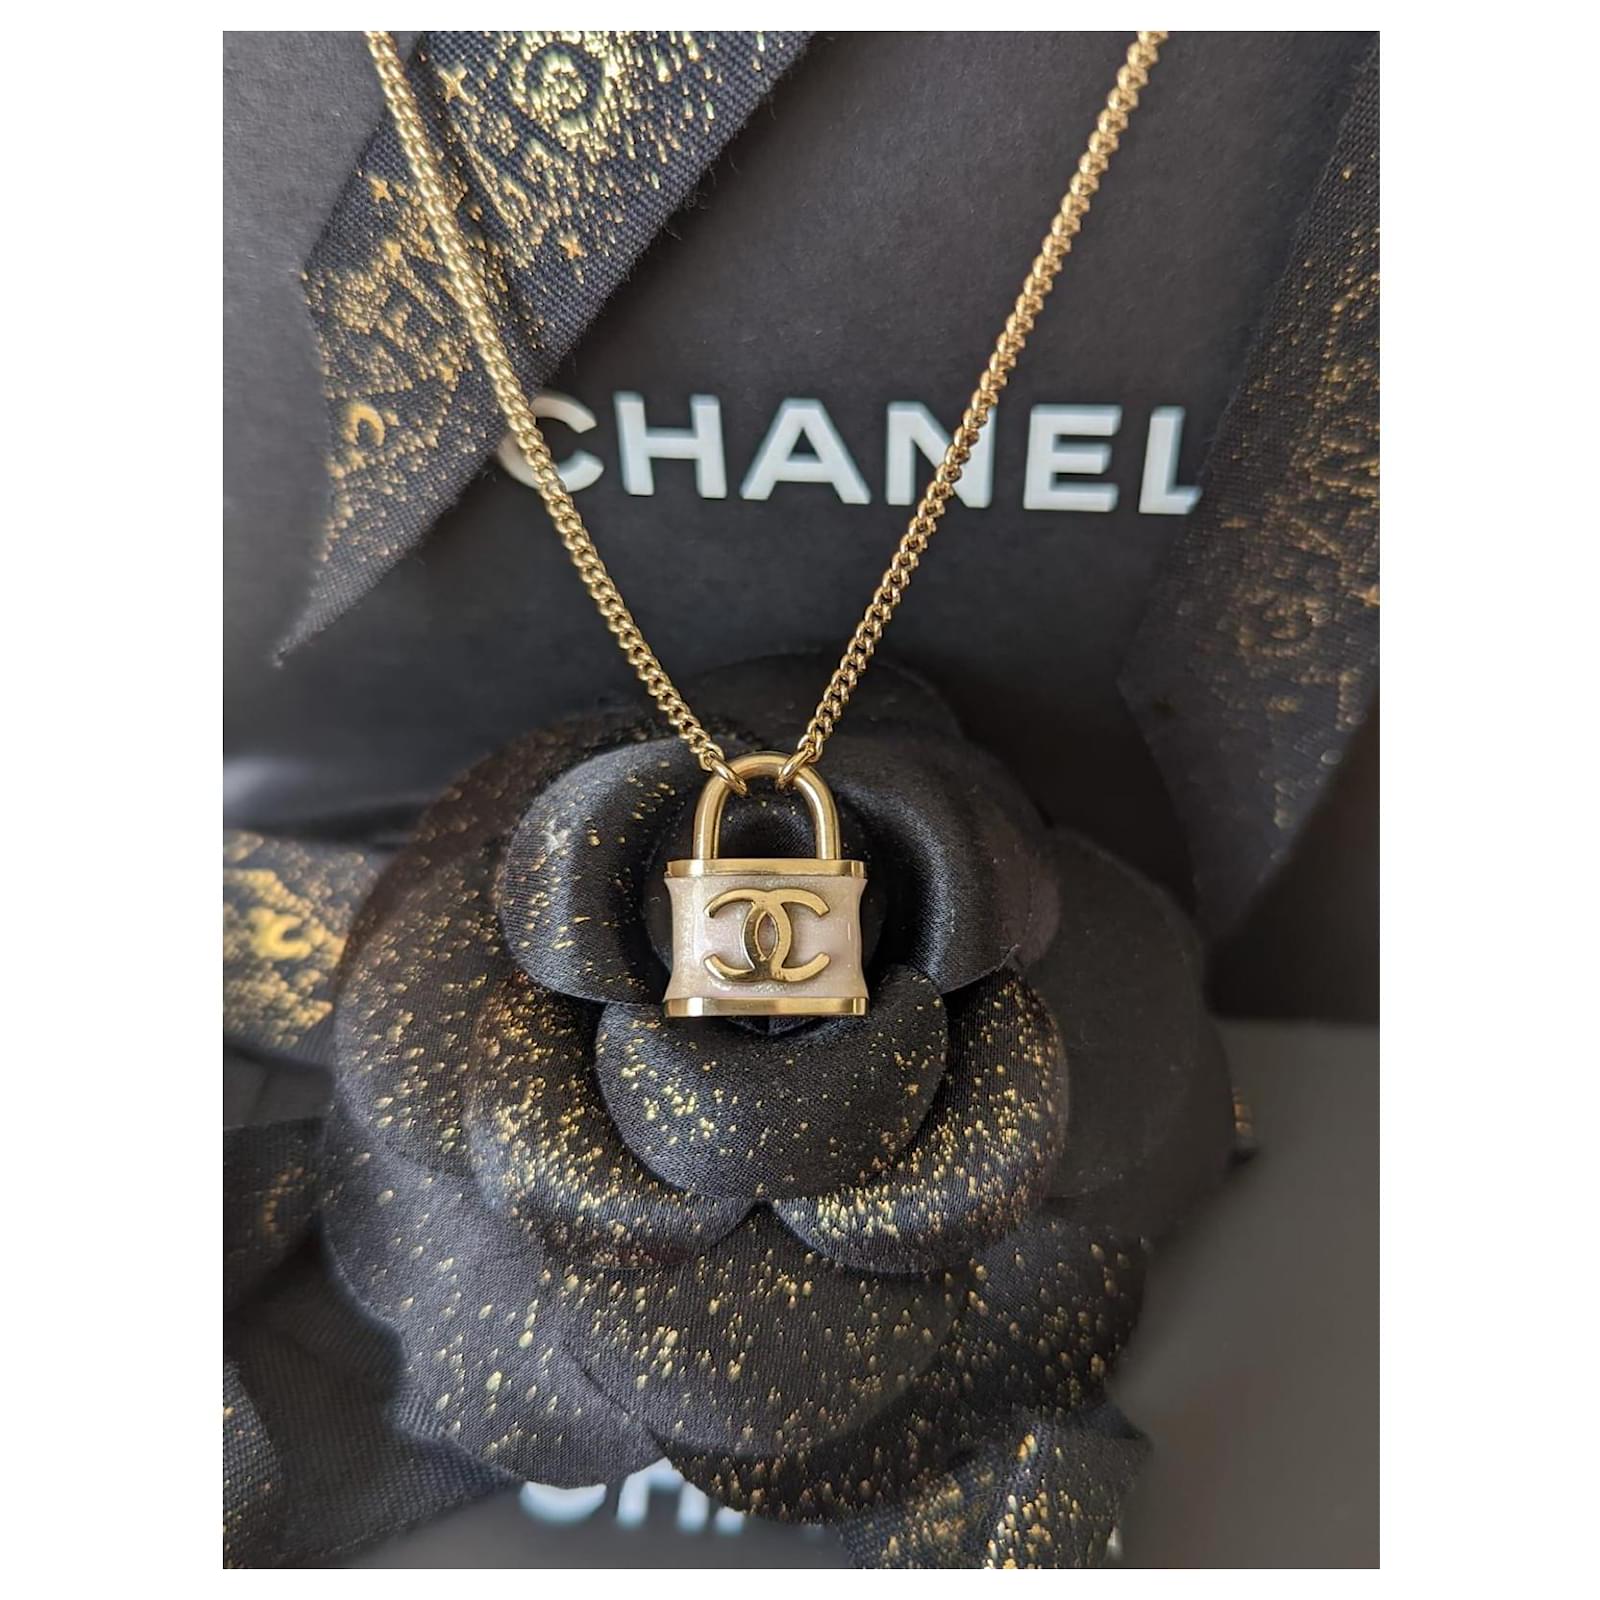 Chanel Enamel and Faux Pearl Jacket Charm Necklace